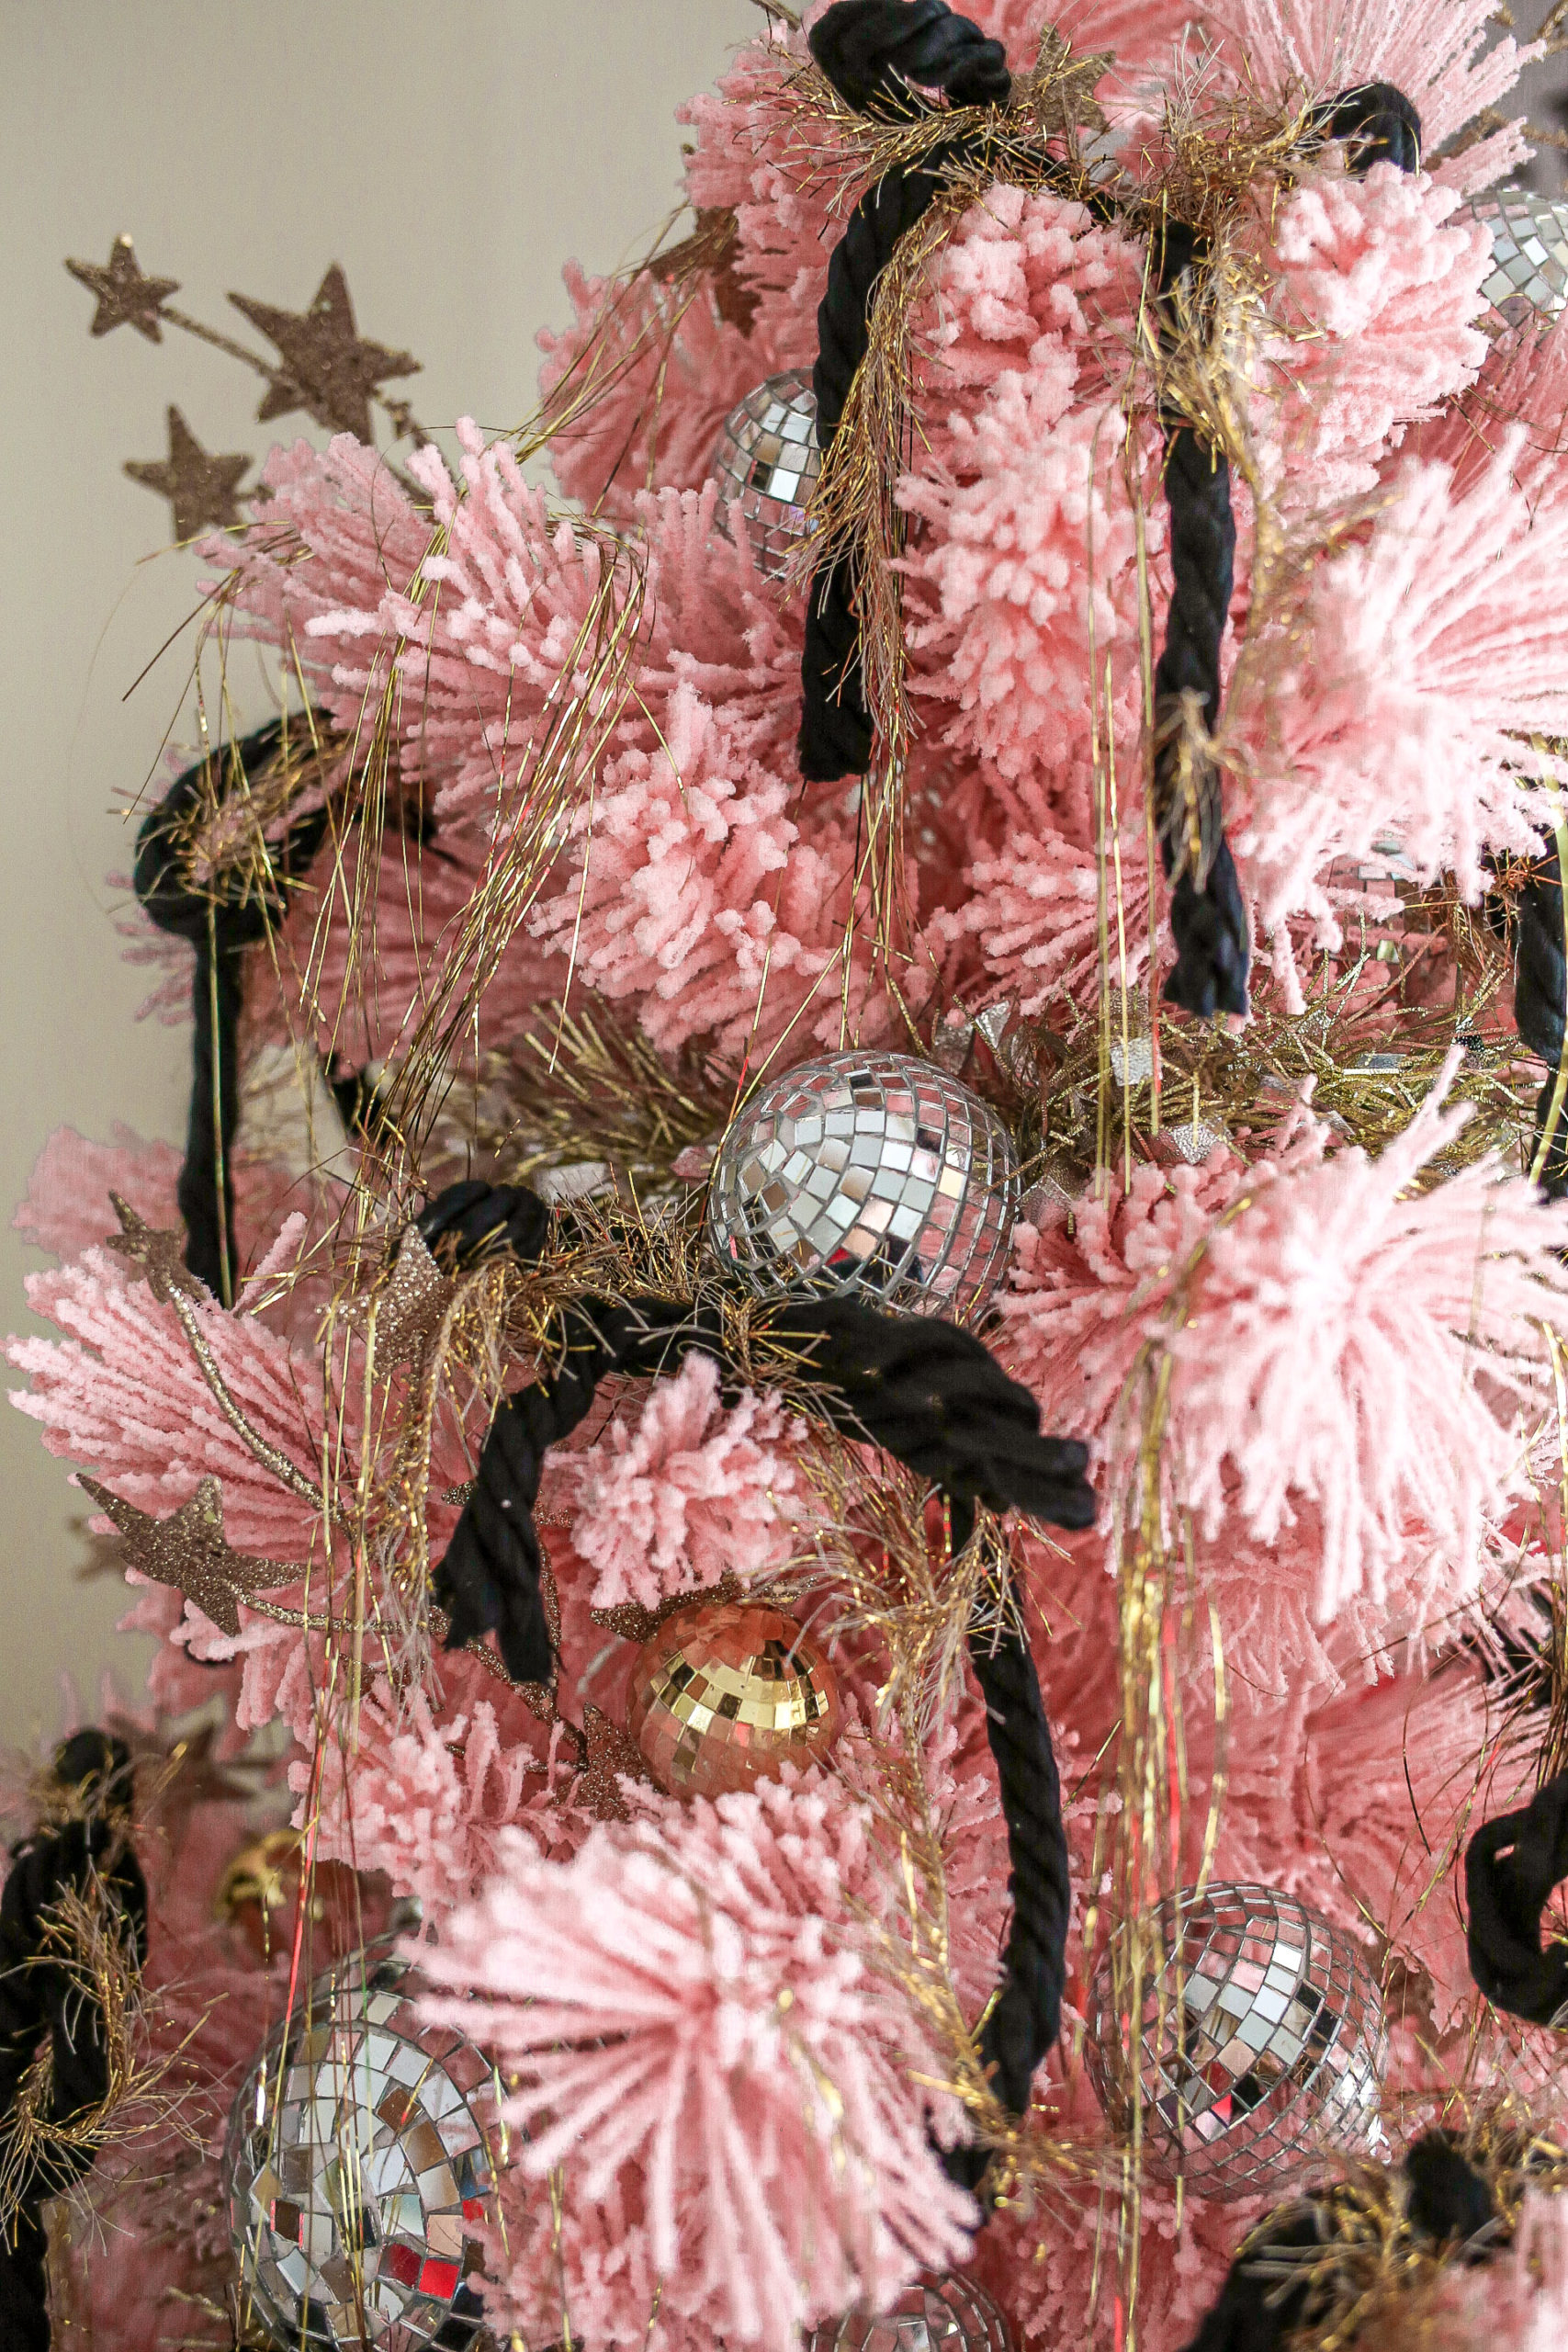 How to Decorate a Tree for New Year’s Eve